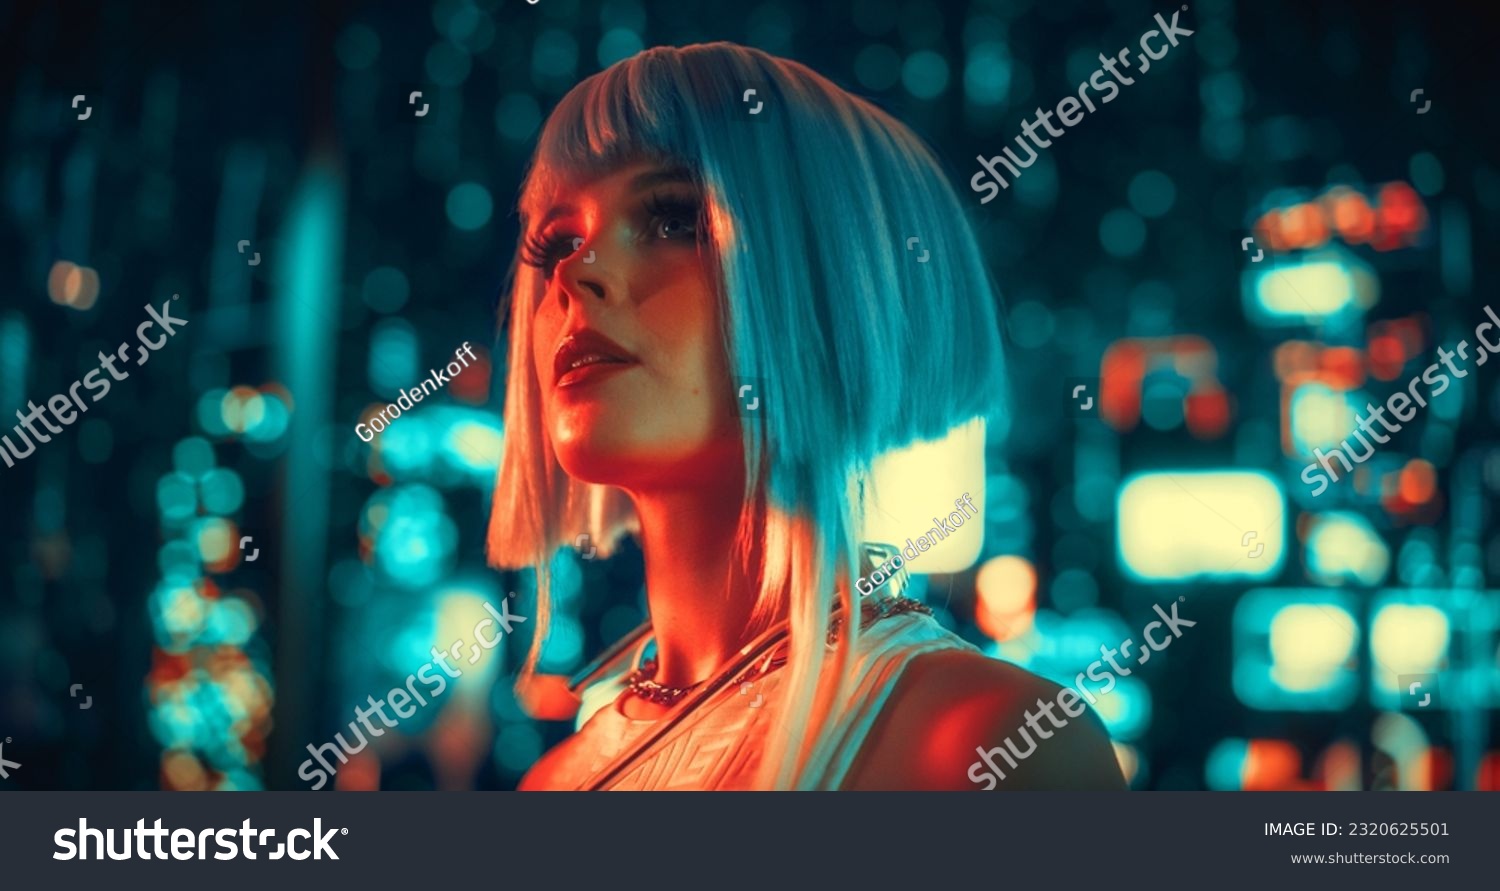 Beautiful Retro-Futuristic Portrait of a Human Gamer Girl Resembling an Android Robot with Artificial Intelligence, Travelling in Modern City with Neon Lights and Colorful Cyberpunk Vibe #2320625501